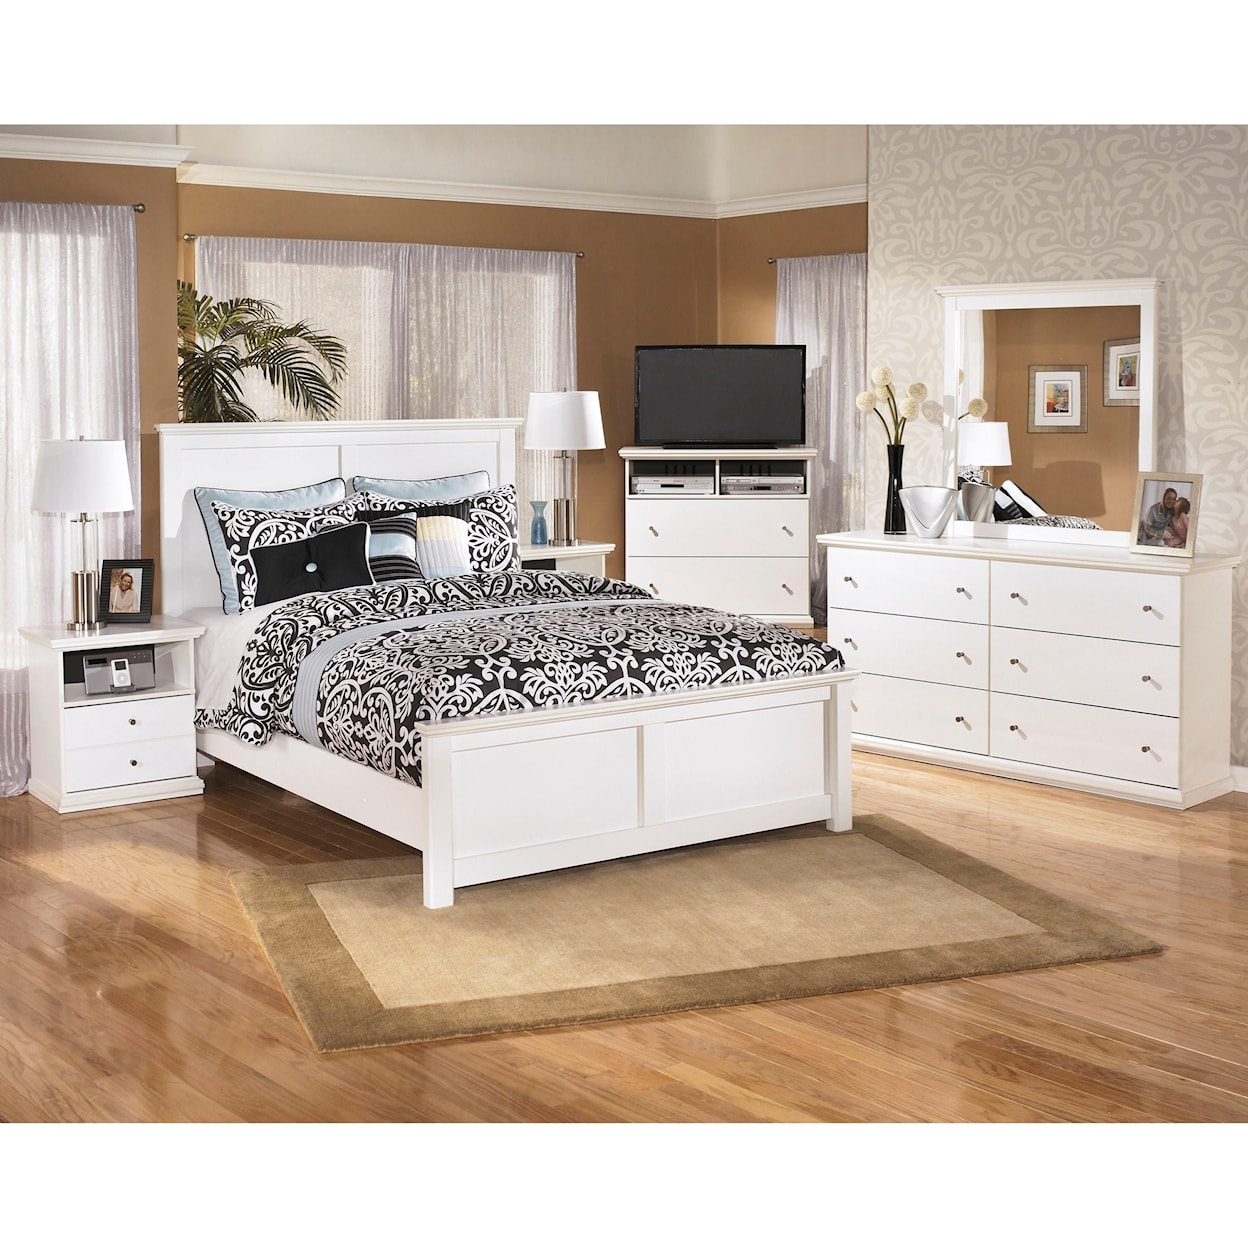 Signature Design by Ashley Bostwick Shoals Queen Bedroom Group